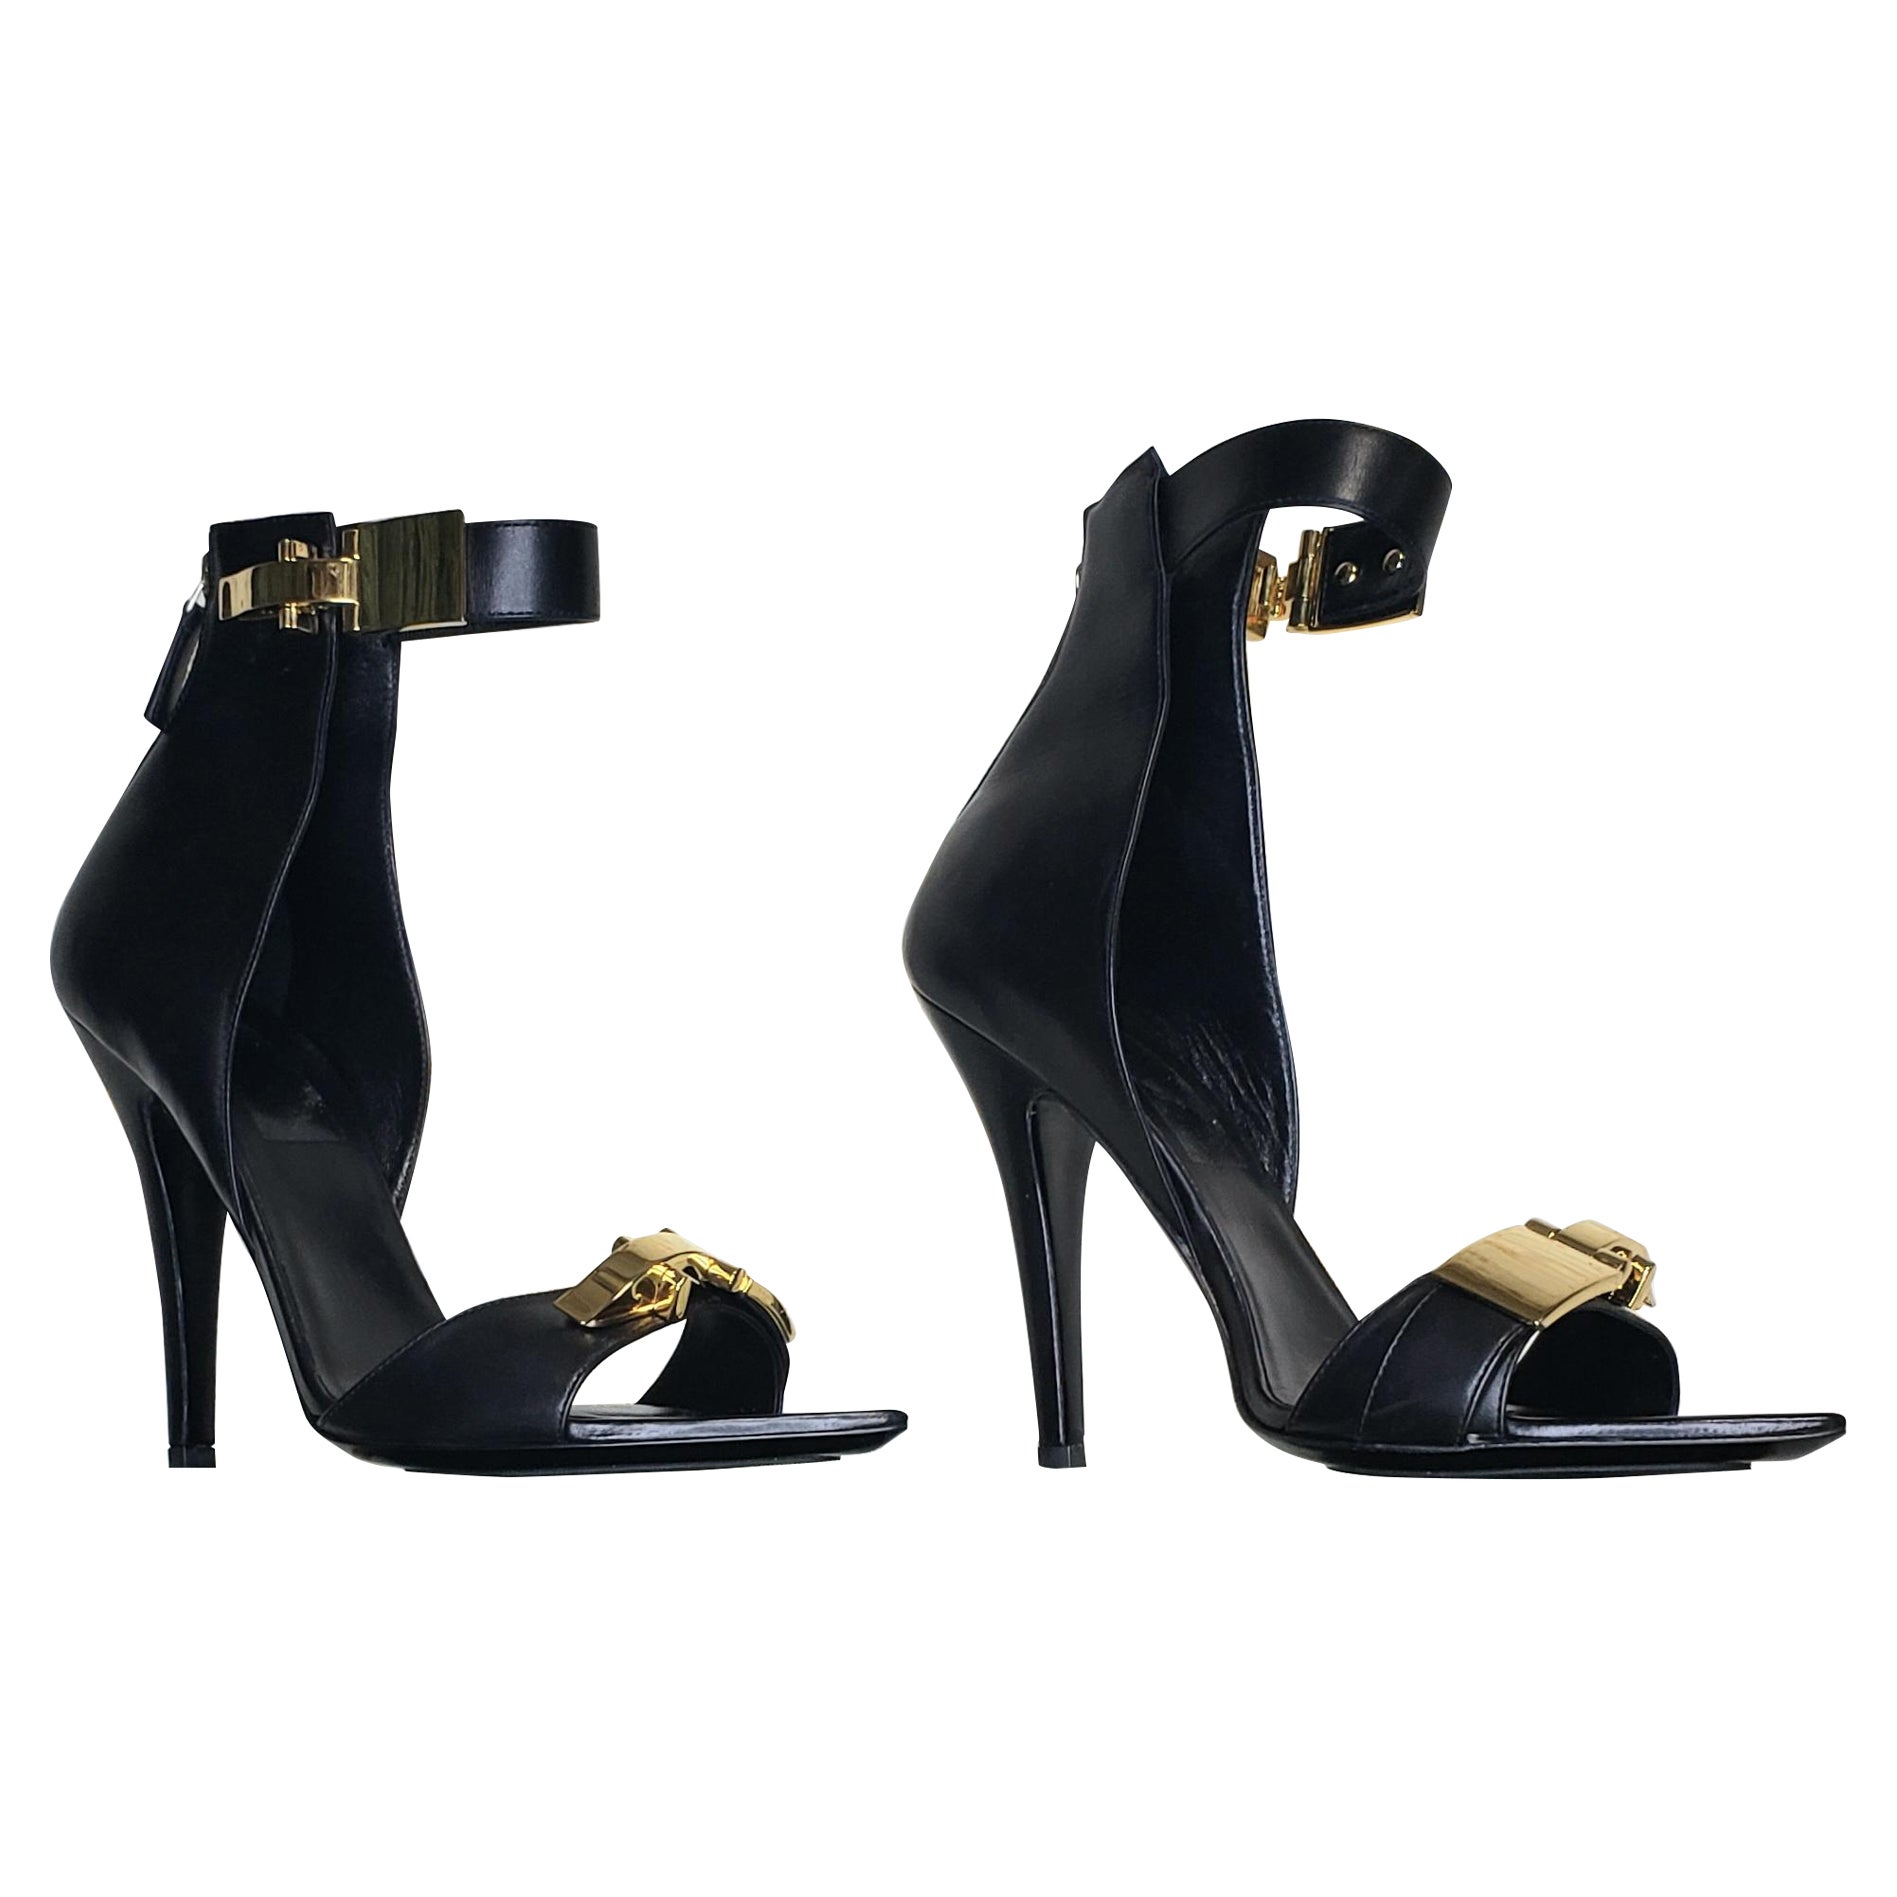 New VERSACE VERSUS BLACK LEATHER ANTHONY VACCARELLO EDITION SANDALS 41 - 11